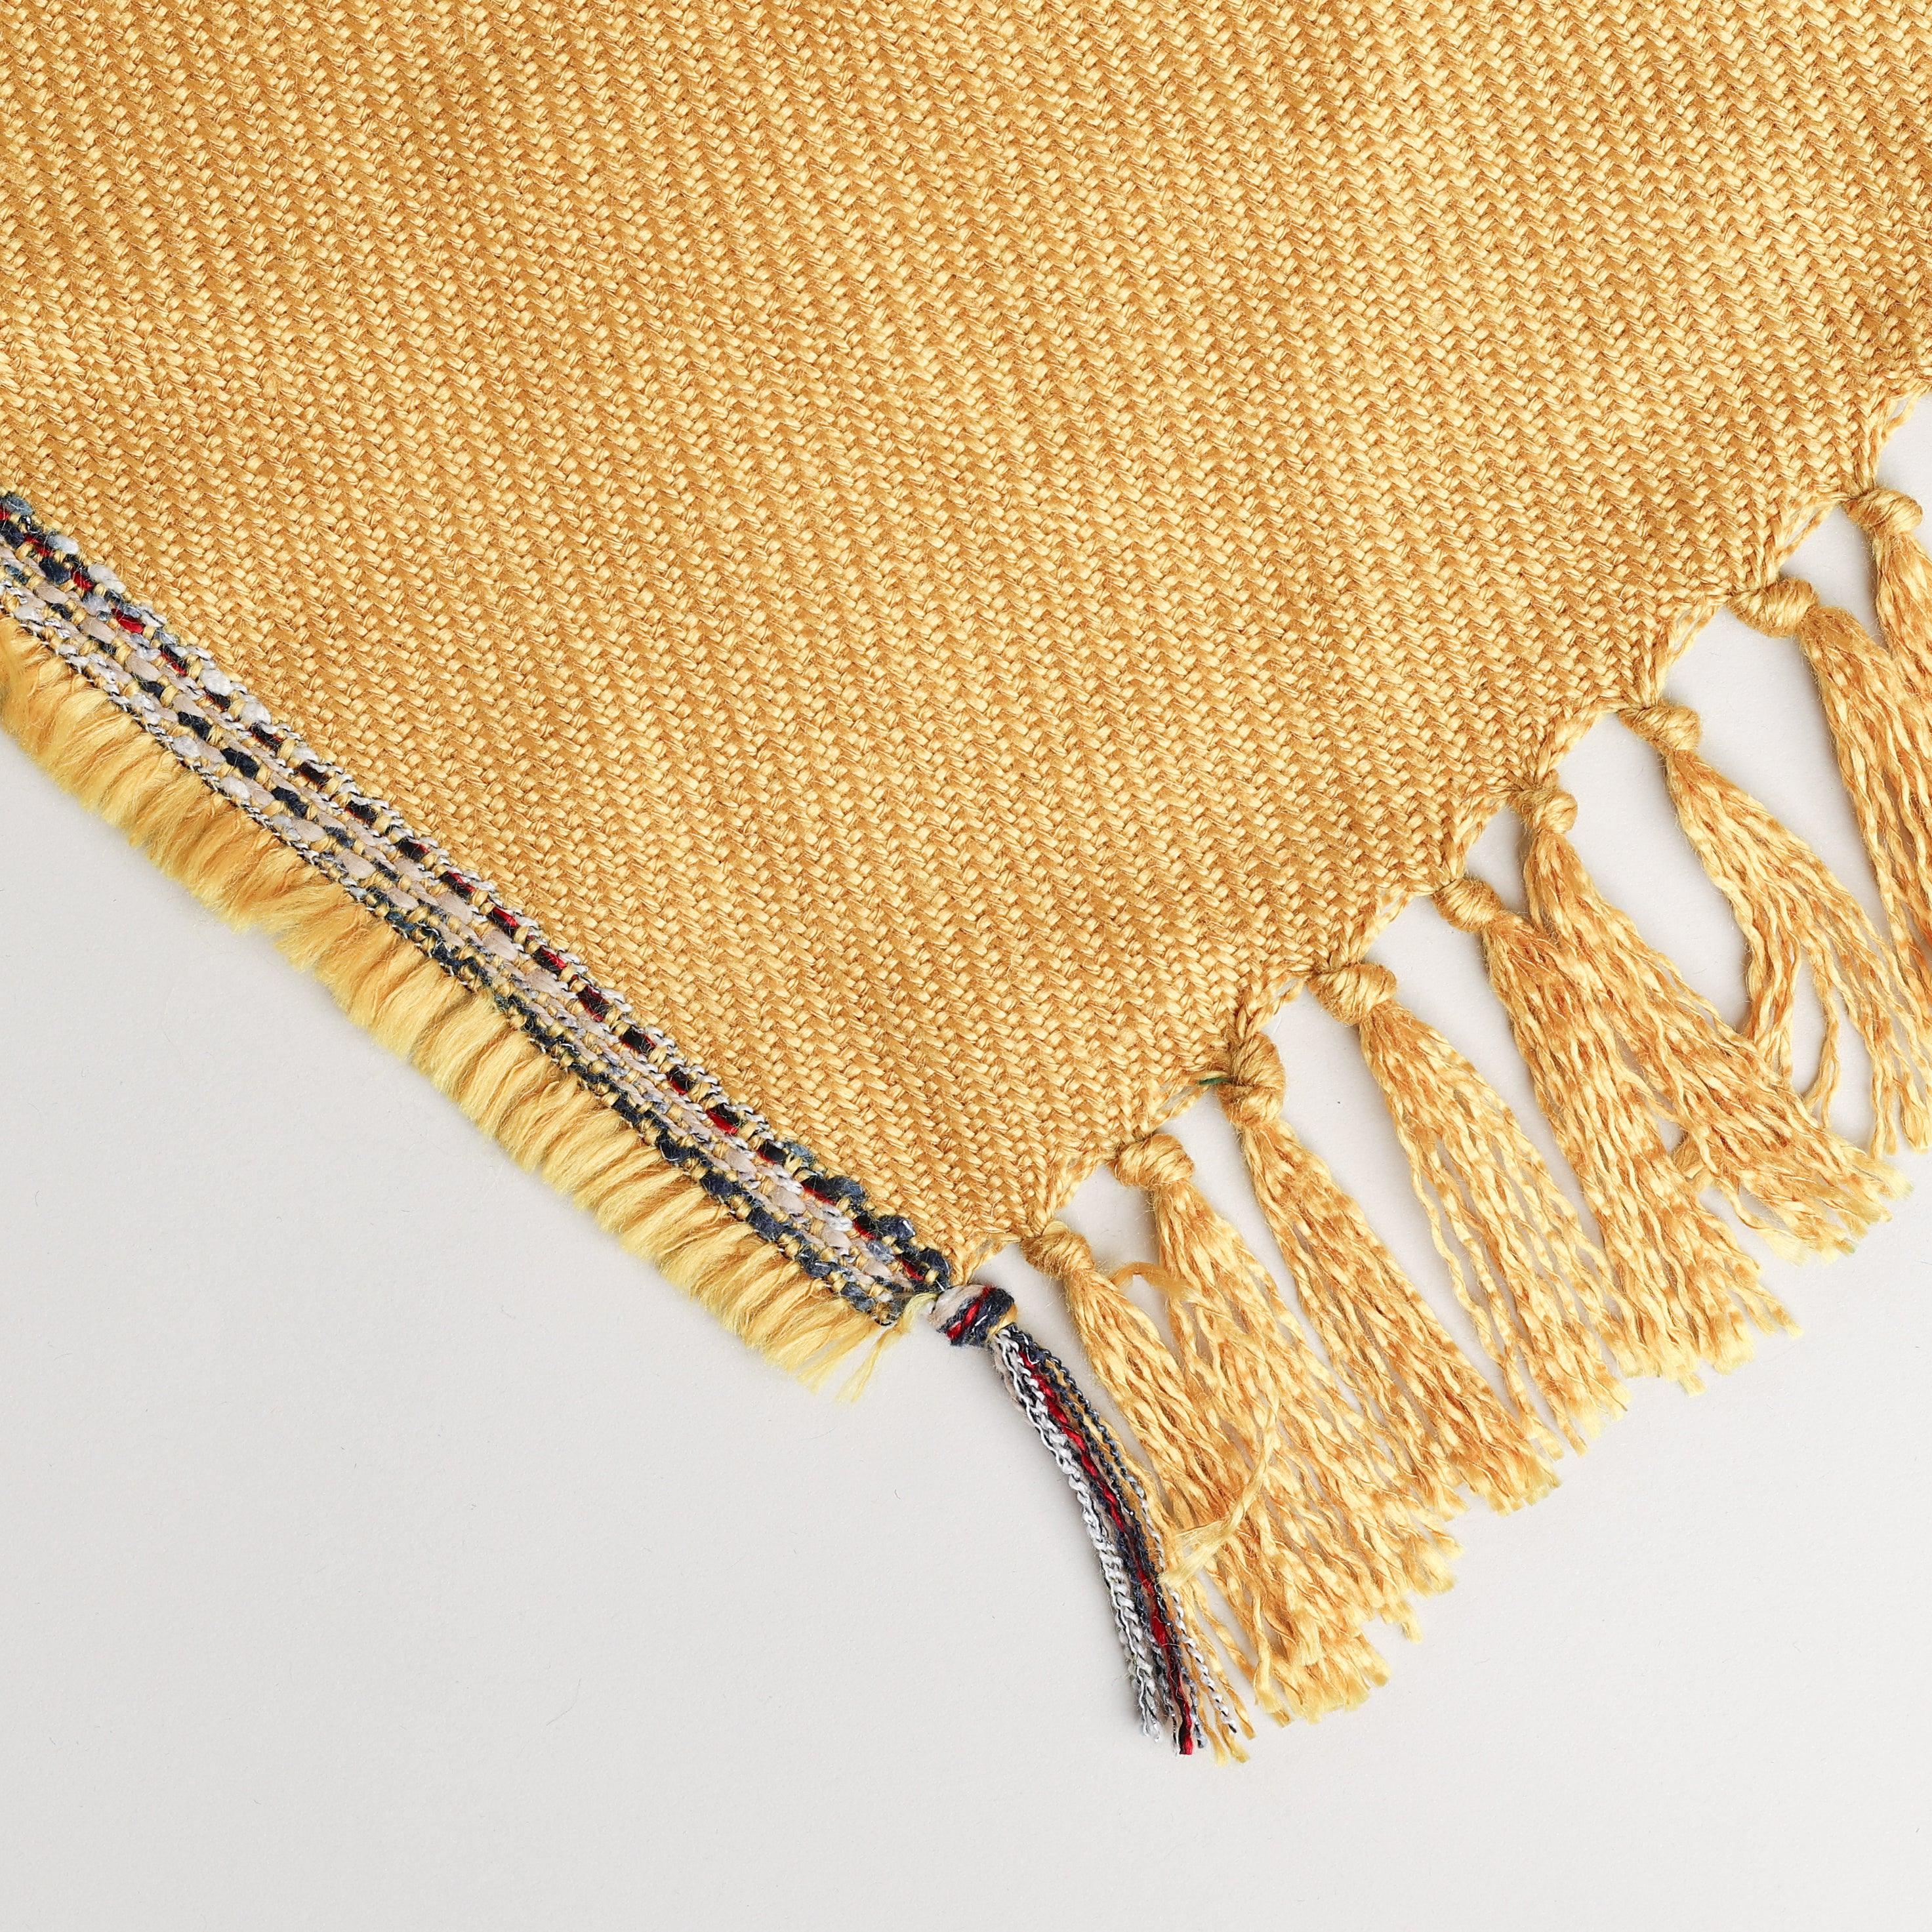 acrylic yellow throw blanket displaying tassels as a pale yellow